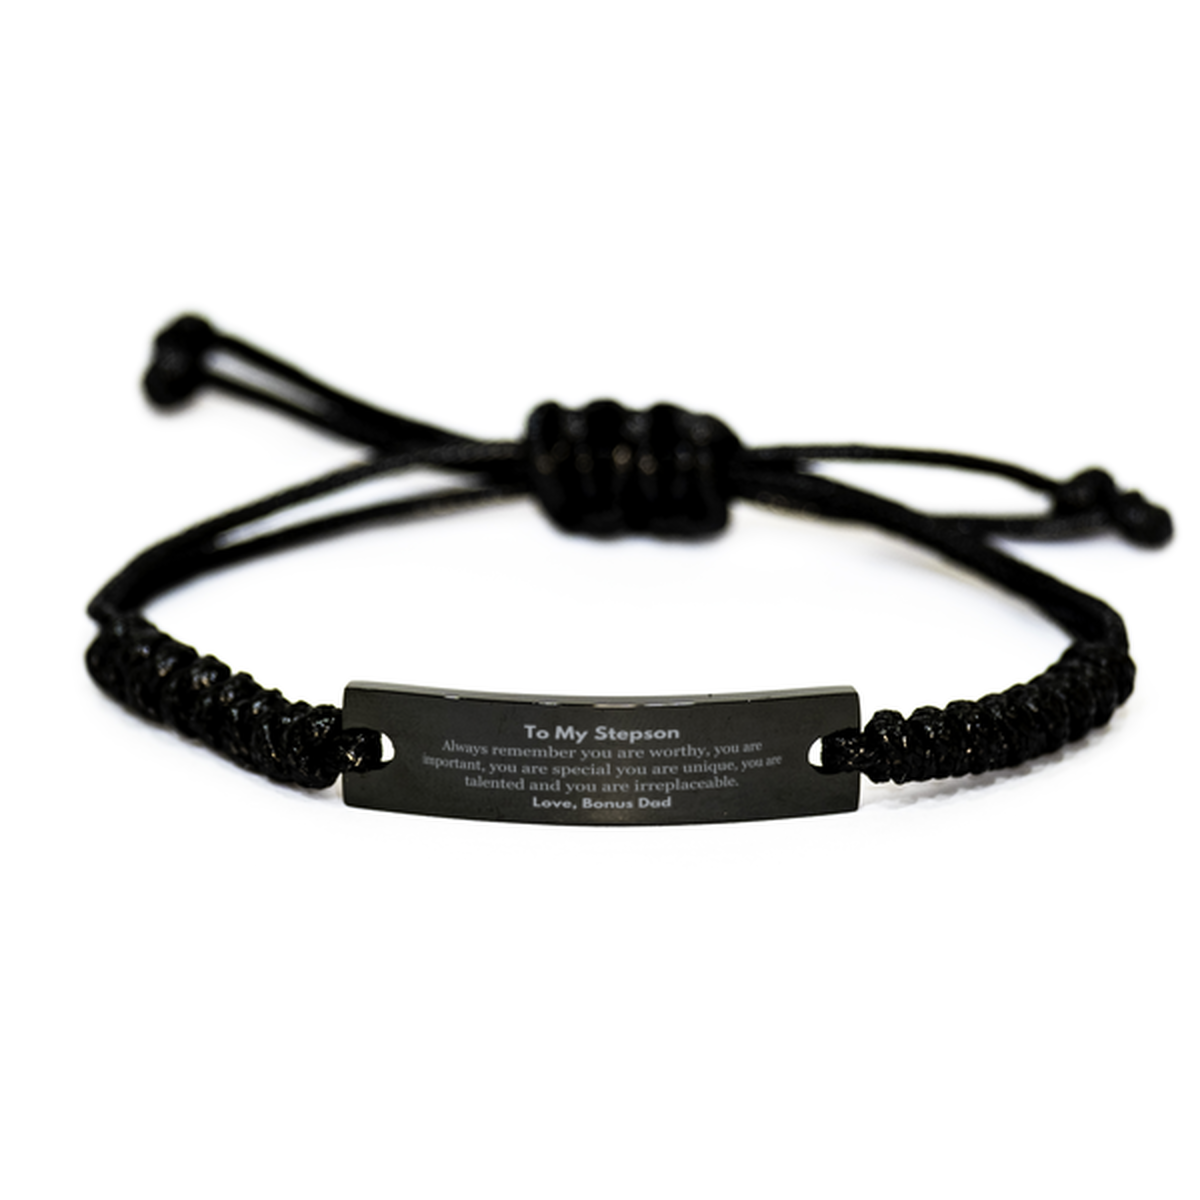 Stepson Birthday Gifts from Bonus Dad, Inspirational Black Rope Bracelet for Stepson Christmas Graduation Gifts for Stepson Always remember you are worthy, you are important. Love, Bonus Dad